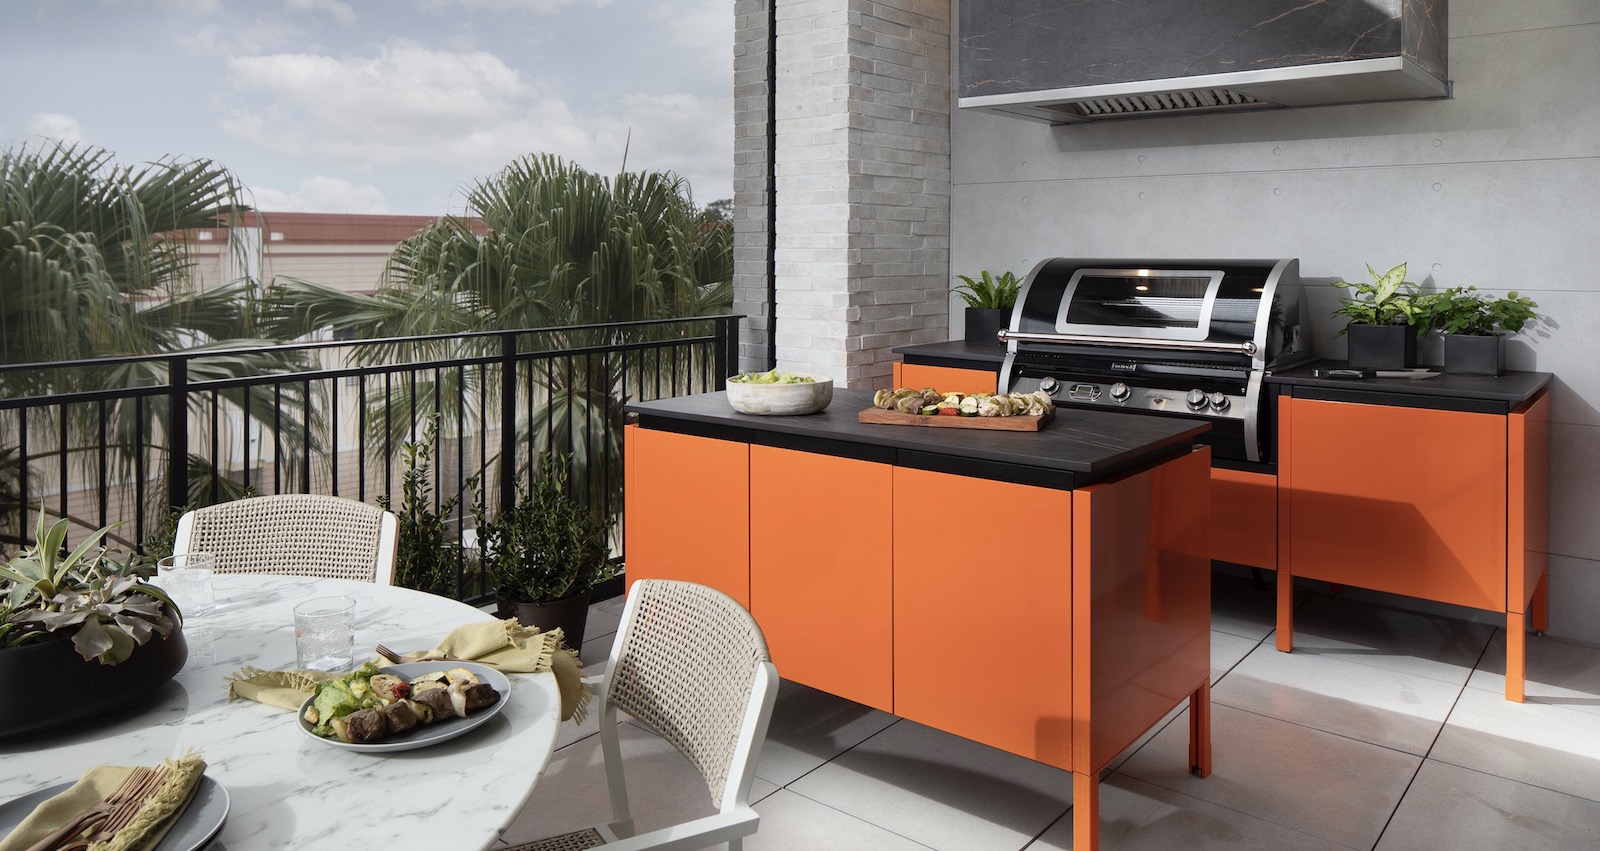 Brown Jordan outdoor kitchen cabinets in bright orange for The New American Home 2021